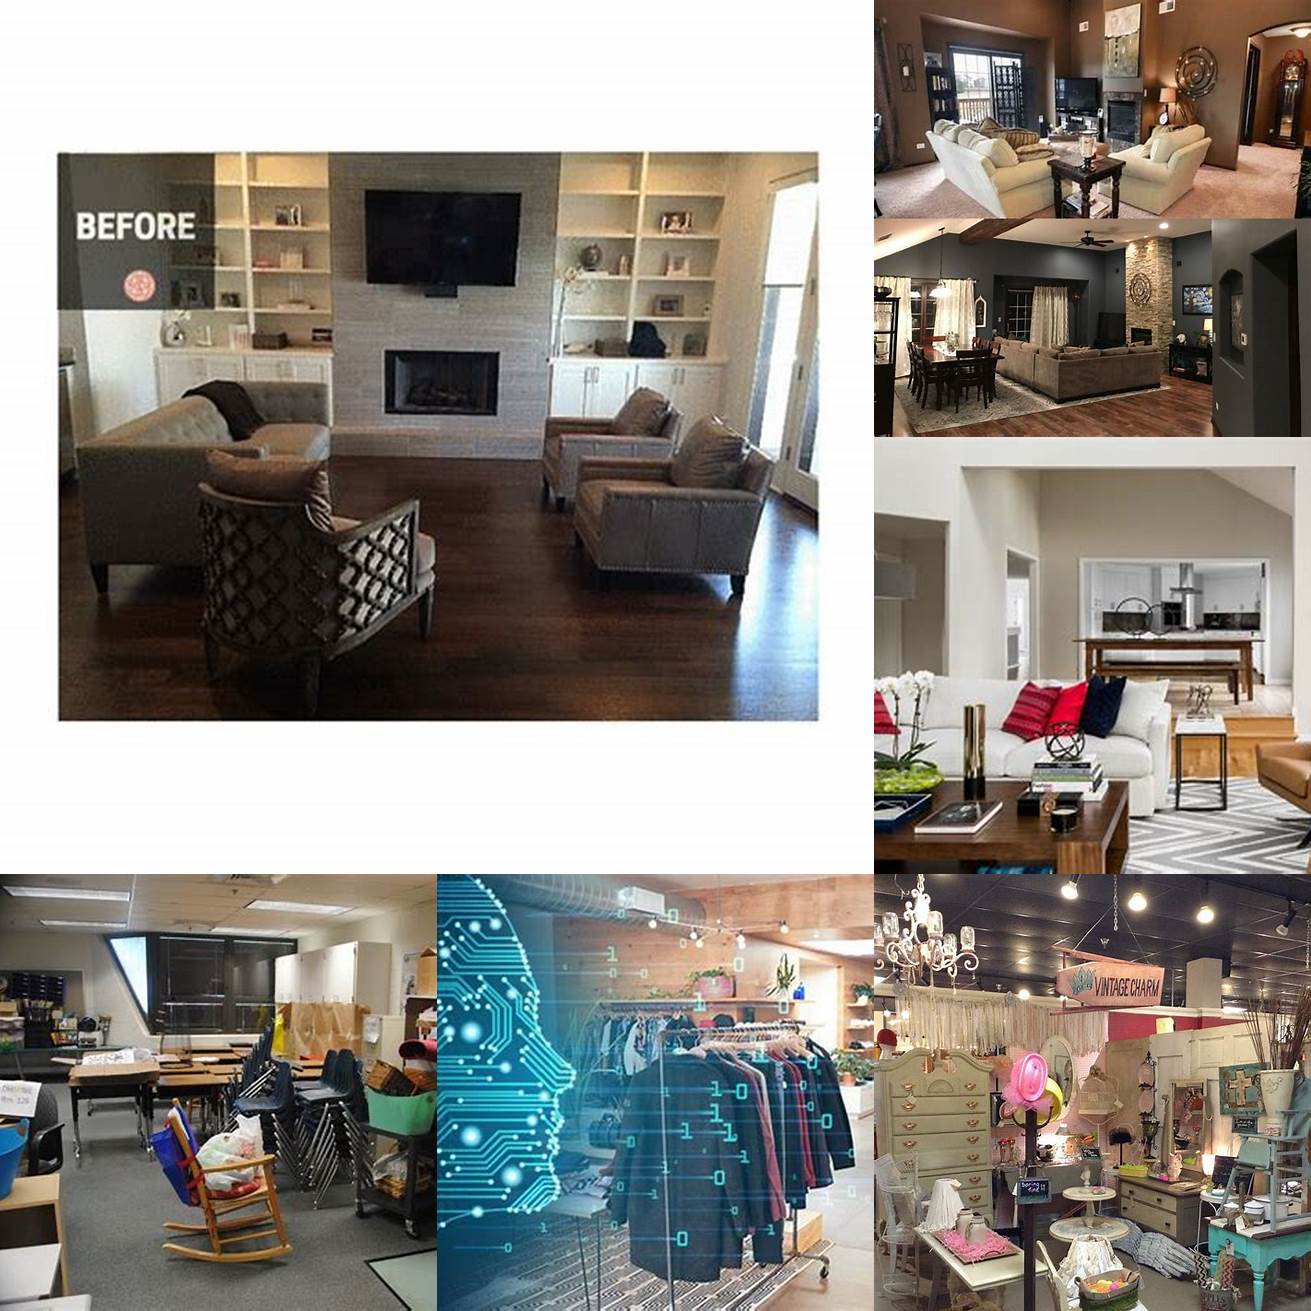 5 Before-and-after shots of a retailers store that has incorporated products from a wholesale distributor